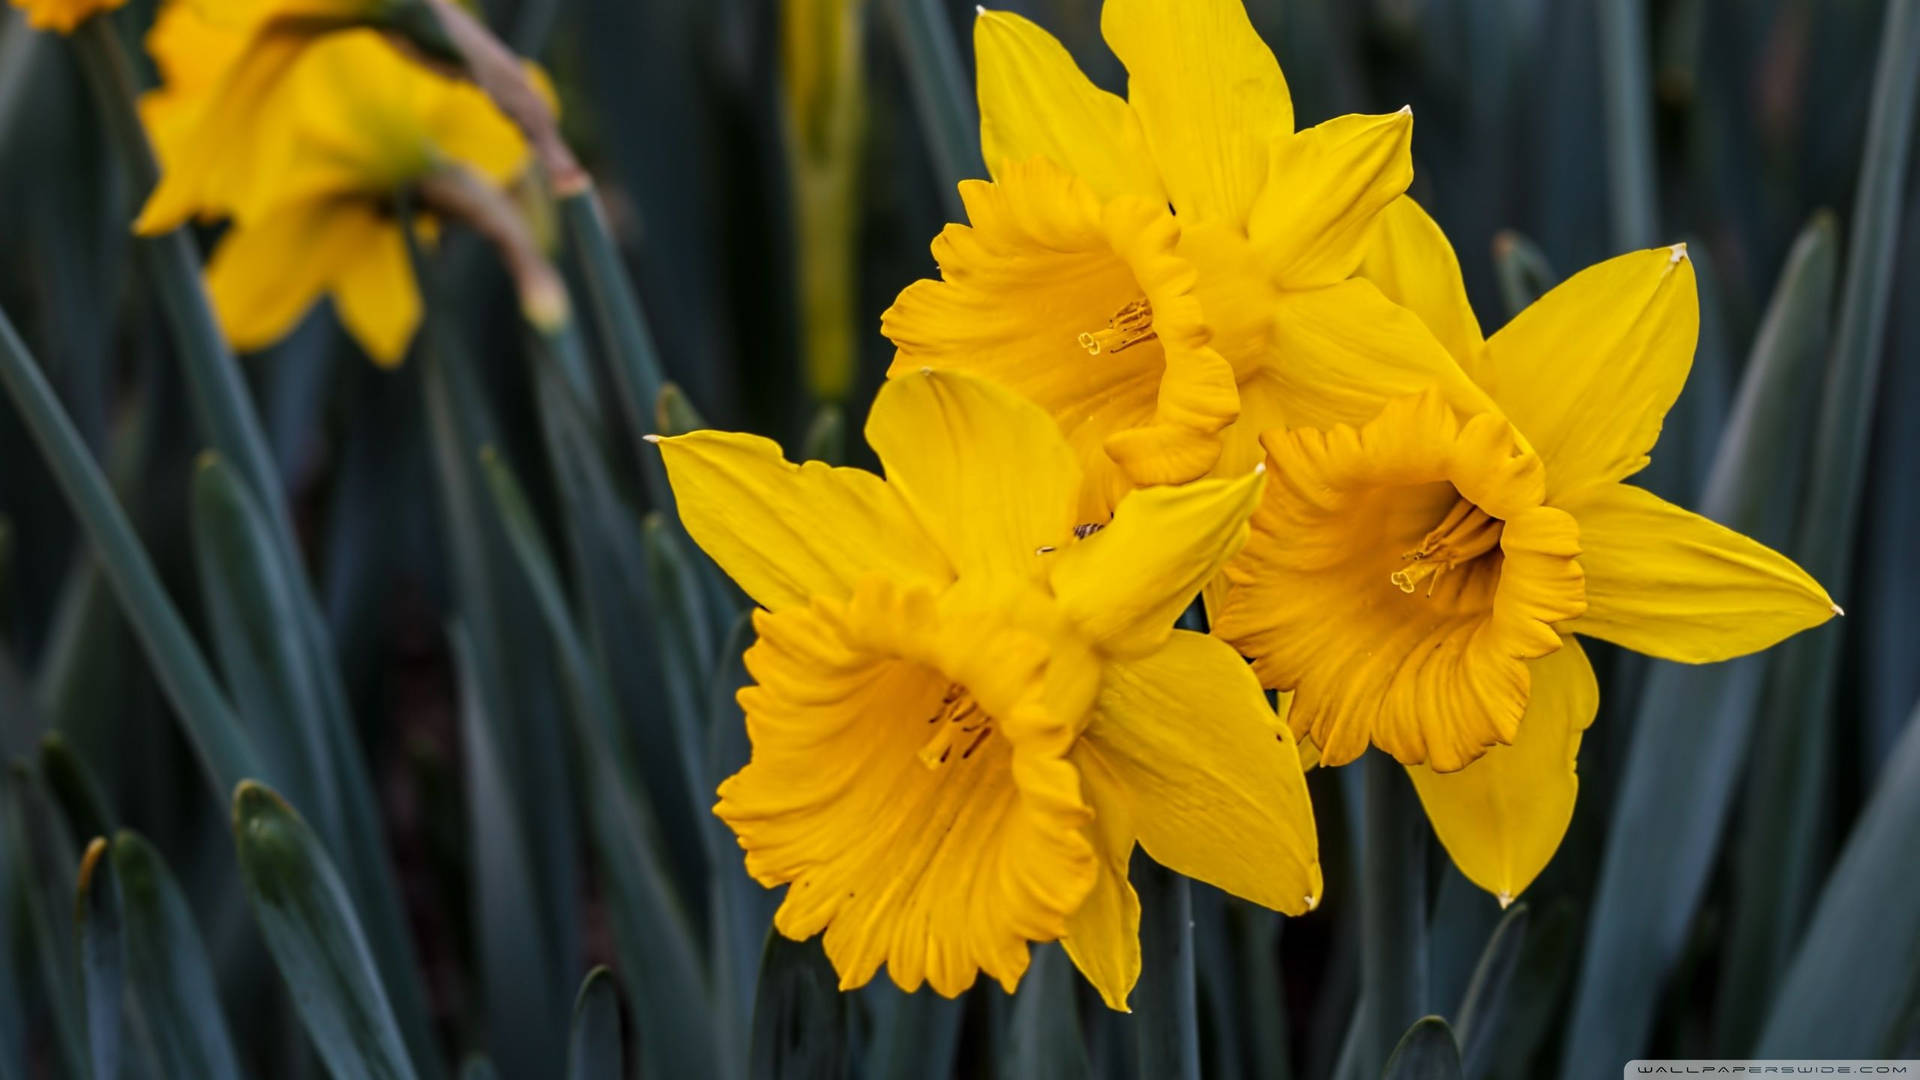 Daffodil 2560X1440 Wallpaper and Background Image